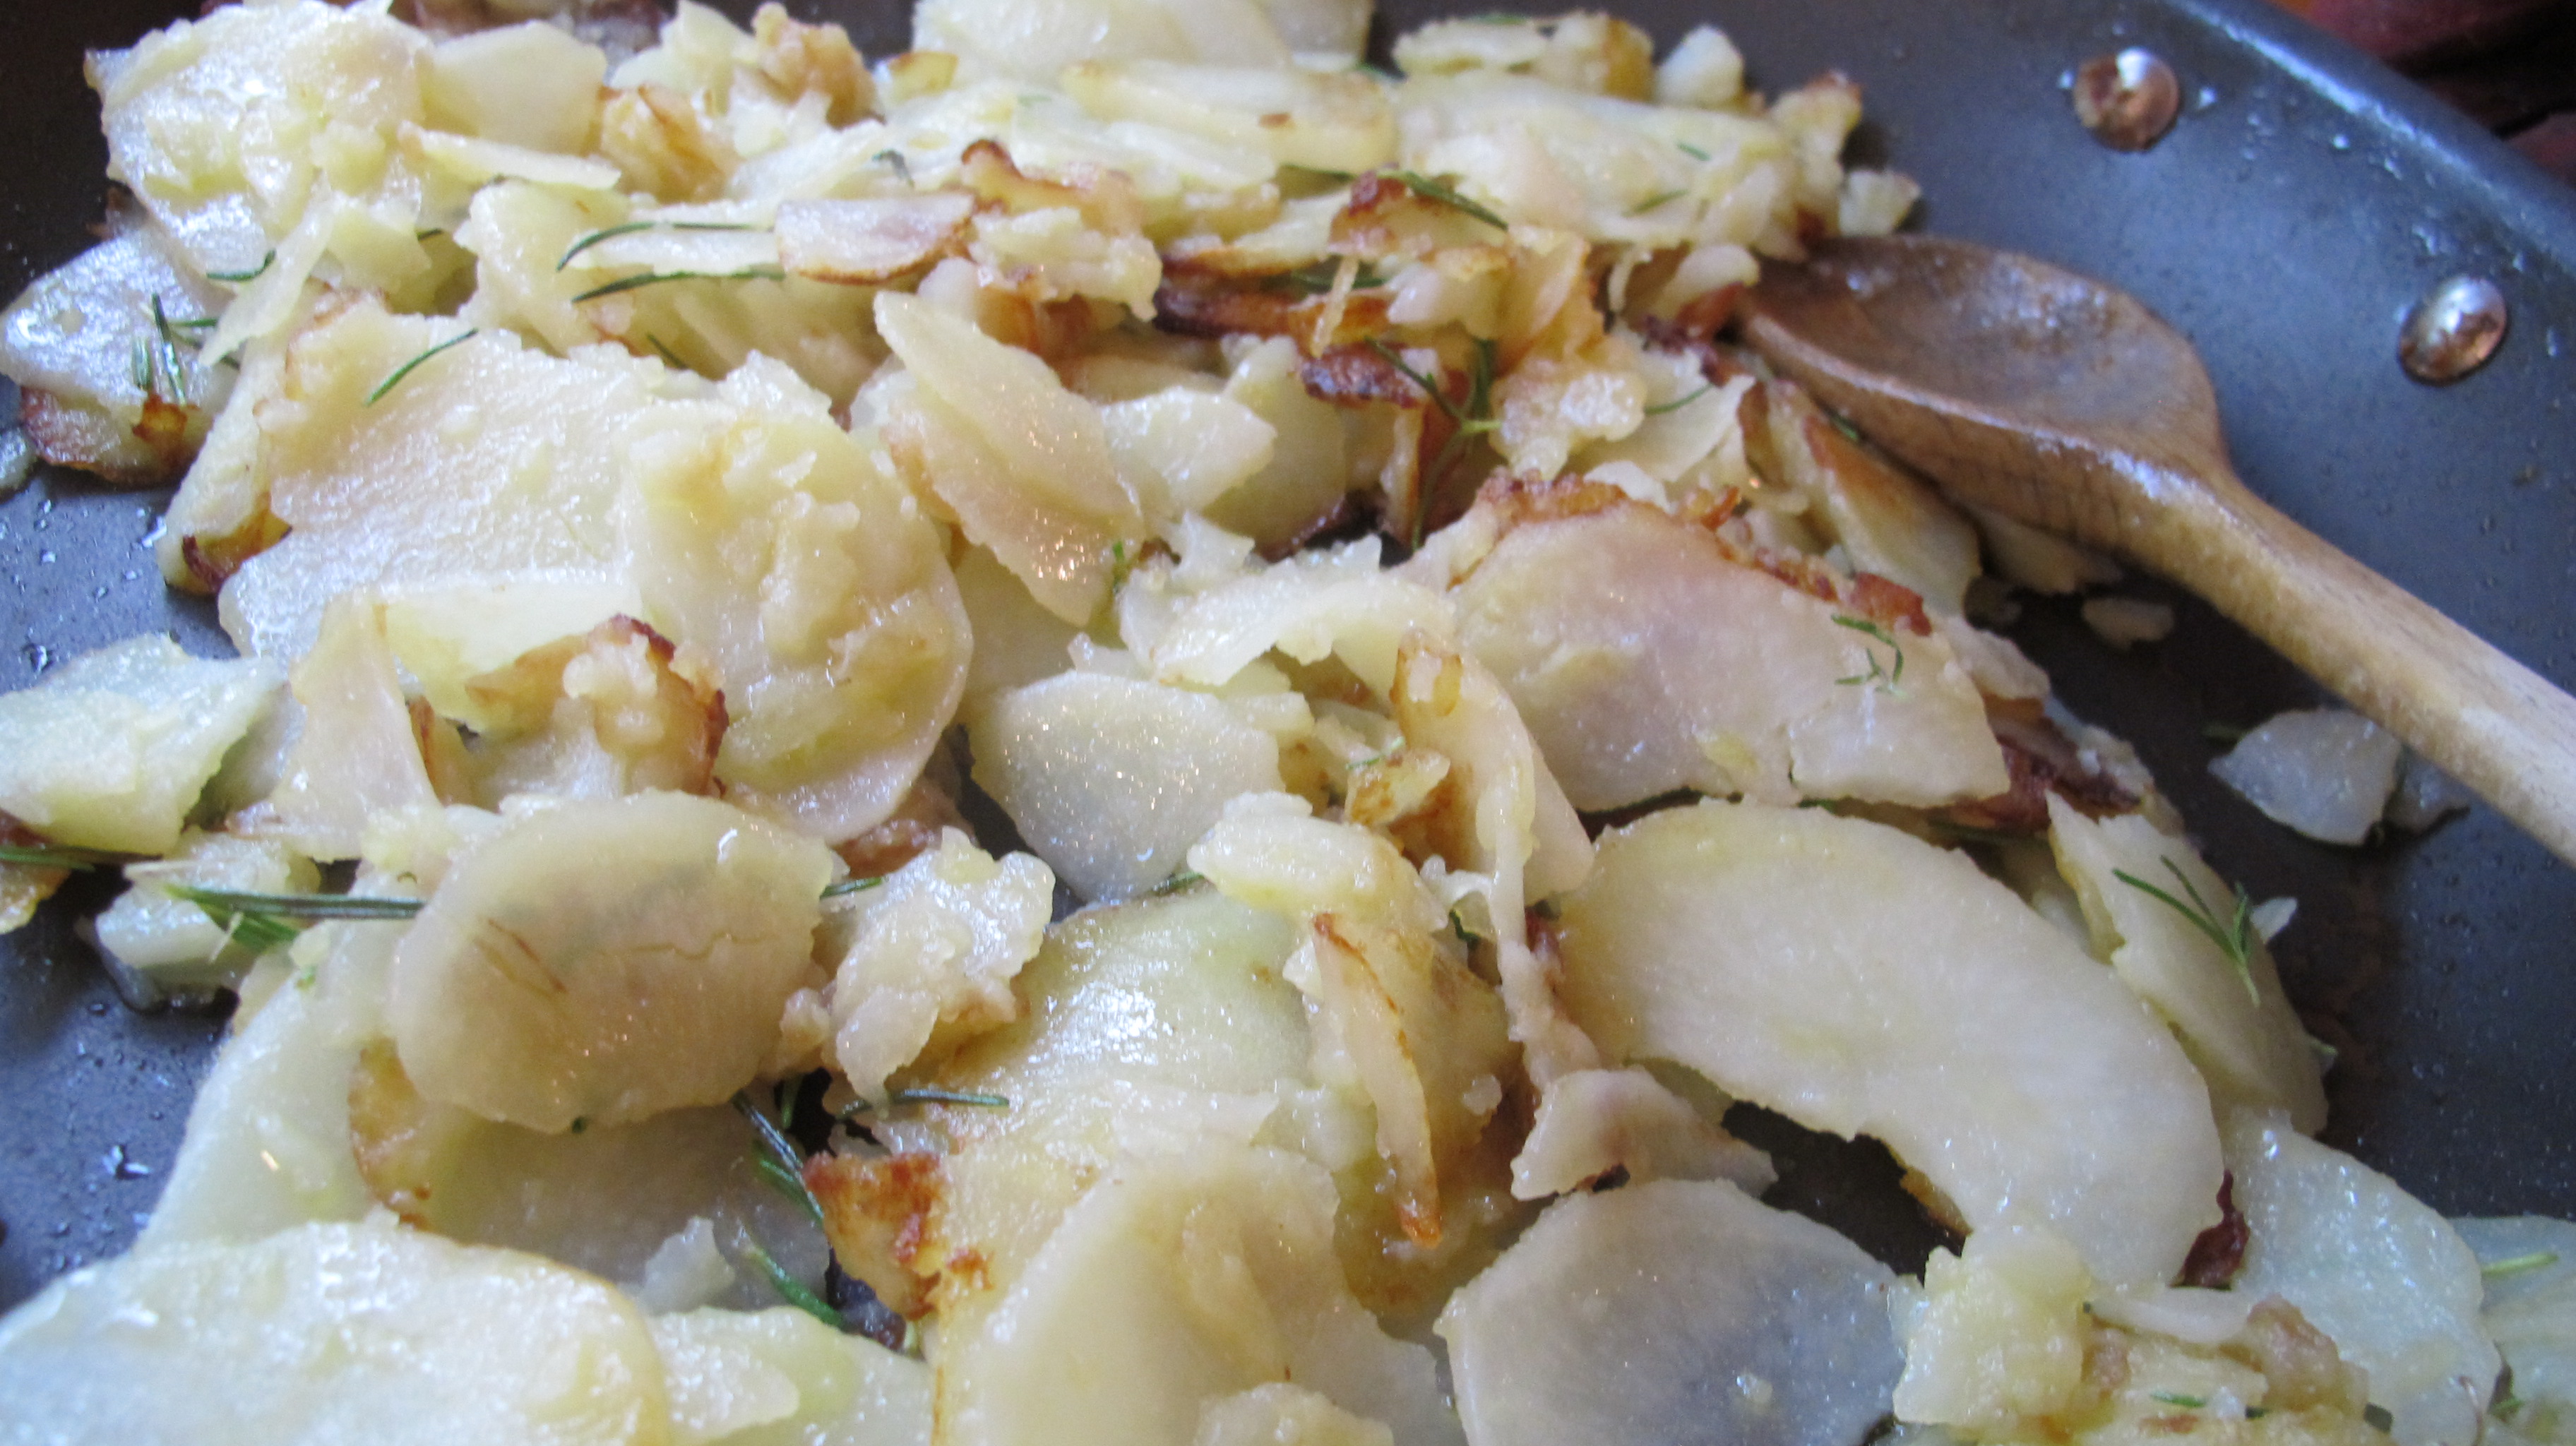 Pan-fry the potatoes until they are slightly golden brown. 